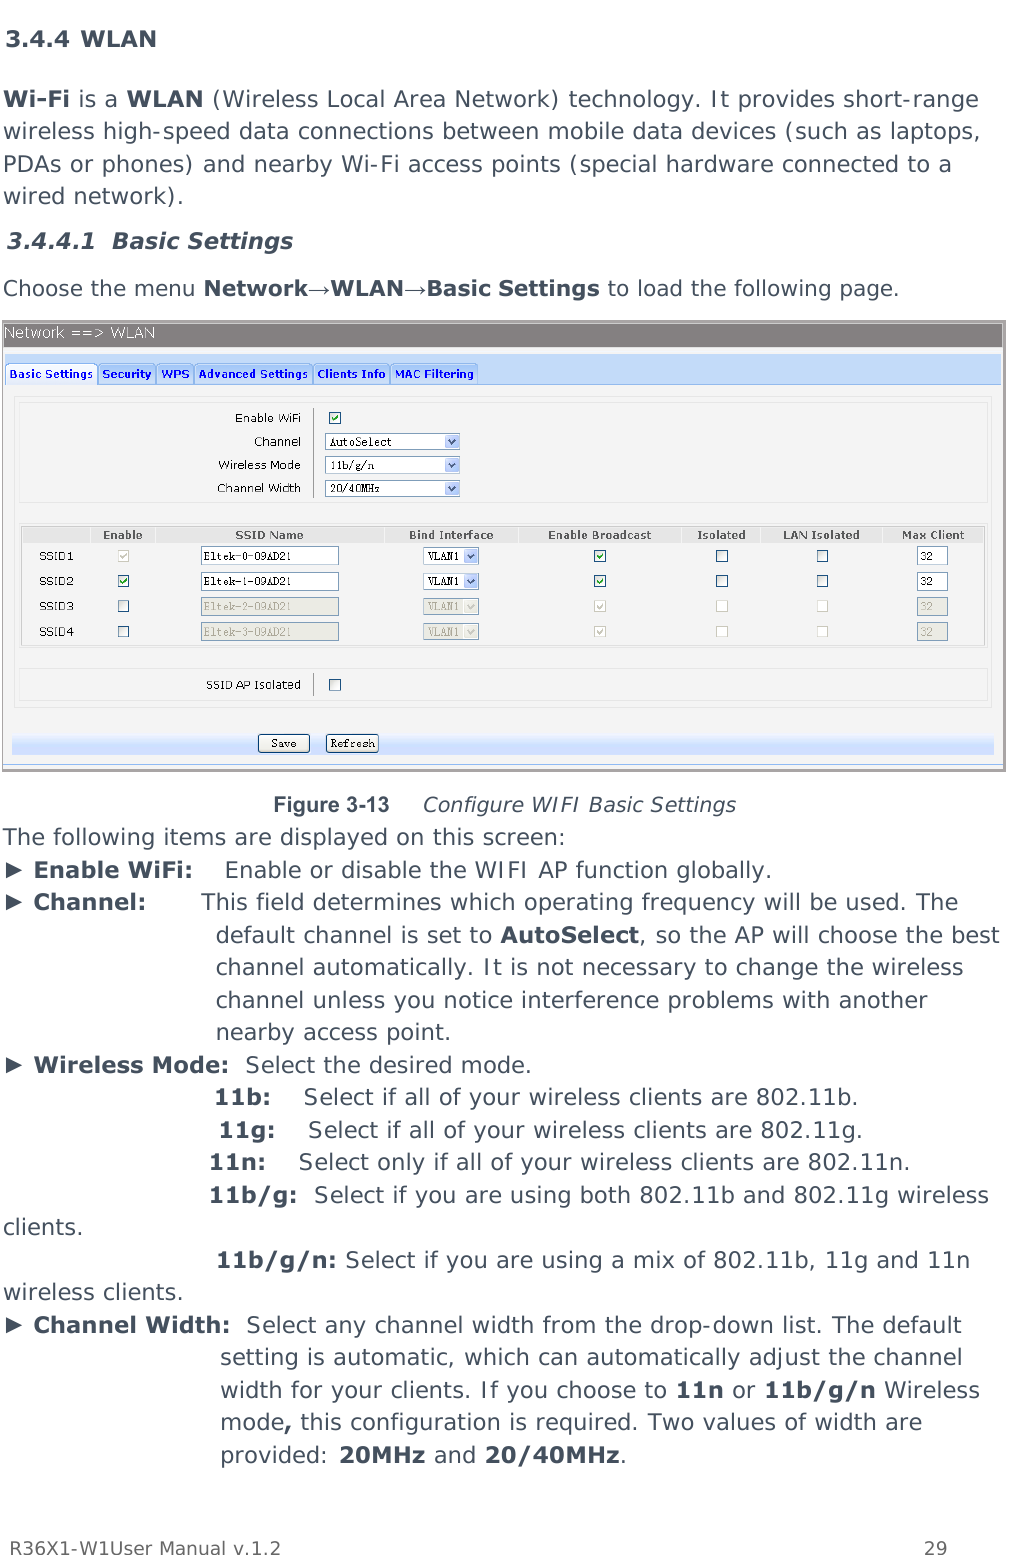           R36X1-W1User Manual v.1.2    29  3.4.4 WLAN Wi-Fi is a WLAN (Wireless Local Area Network) technology. It provides short-range wireless high-speed data connections between mobile data devices (such as laptops, PDAs or phones) and nearby Wi-Fi access points (special hardware connected to a wired network). 3.4.4.1 Basic Settings Choose the menu Network→WLAN→Basic Settings to load the following page.  Figure 3-13  Configure WIFI Basic Settings The following items are displayed on this screen: ► Enable WiFi:    Enable or disable the WIFI AP function globally. ► Channel:       This field determines which operating frequency will be used. The default channel is set to AutoSelect, so the AP will choose the best channel automatically. It is not necessary to change the wireless channel unless you notice interference problems with another nearby access point. ► Wireless Mode:  Select the desired mode.  11b:    Select if all of your wireless clients are 802.11b.  11g:    Select if all of your wireless clients are 802.11g.  11n:    Select only if all of your wireless clients are 802.11n.  11b/g:  Select if you are using both 802.11b and 802.11g wireless clients.  11b/g/n: Select if you are using a mix of 802.11b, 11g and 11n wireless clients. ► Channel Width:  Select any channel width from the drop-down list. The default setting is automatic, which can automatically adjust the channel width for your clients. If you choose to 11n or 11b/g/n Wireless mode, this configuration is required. Two values of width are provided: 20MHz and 20/40MHz.  